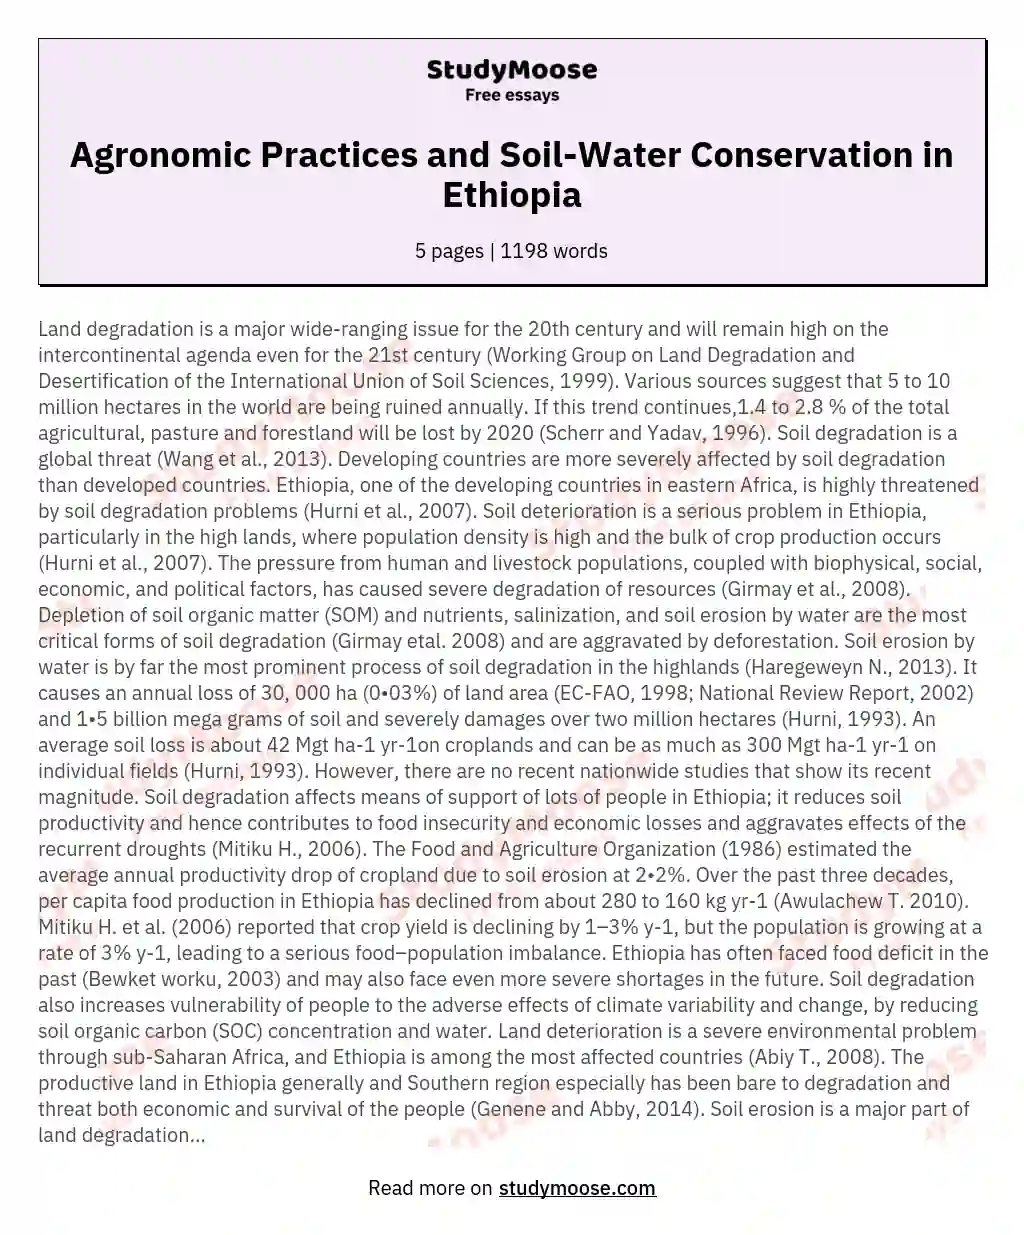 Agronomic Practices and Soil-Water Conservation in Ethiopia essay